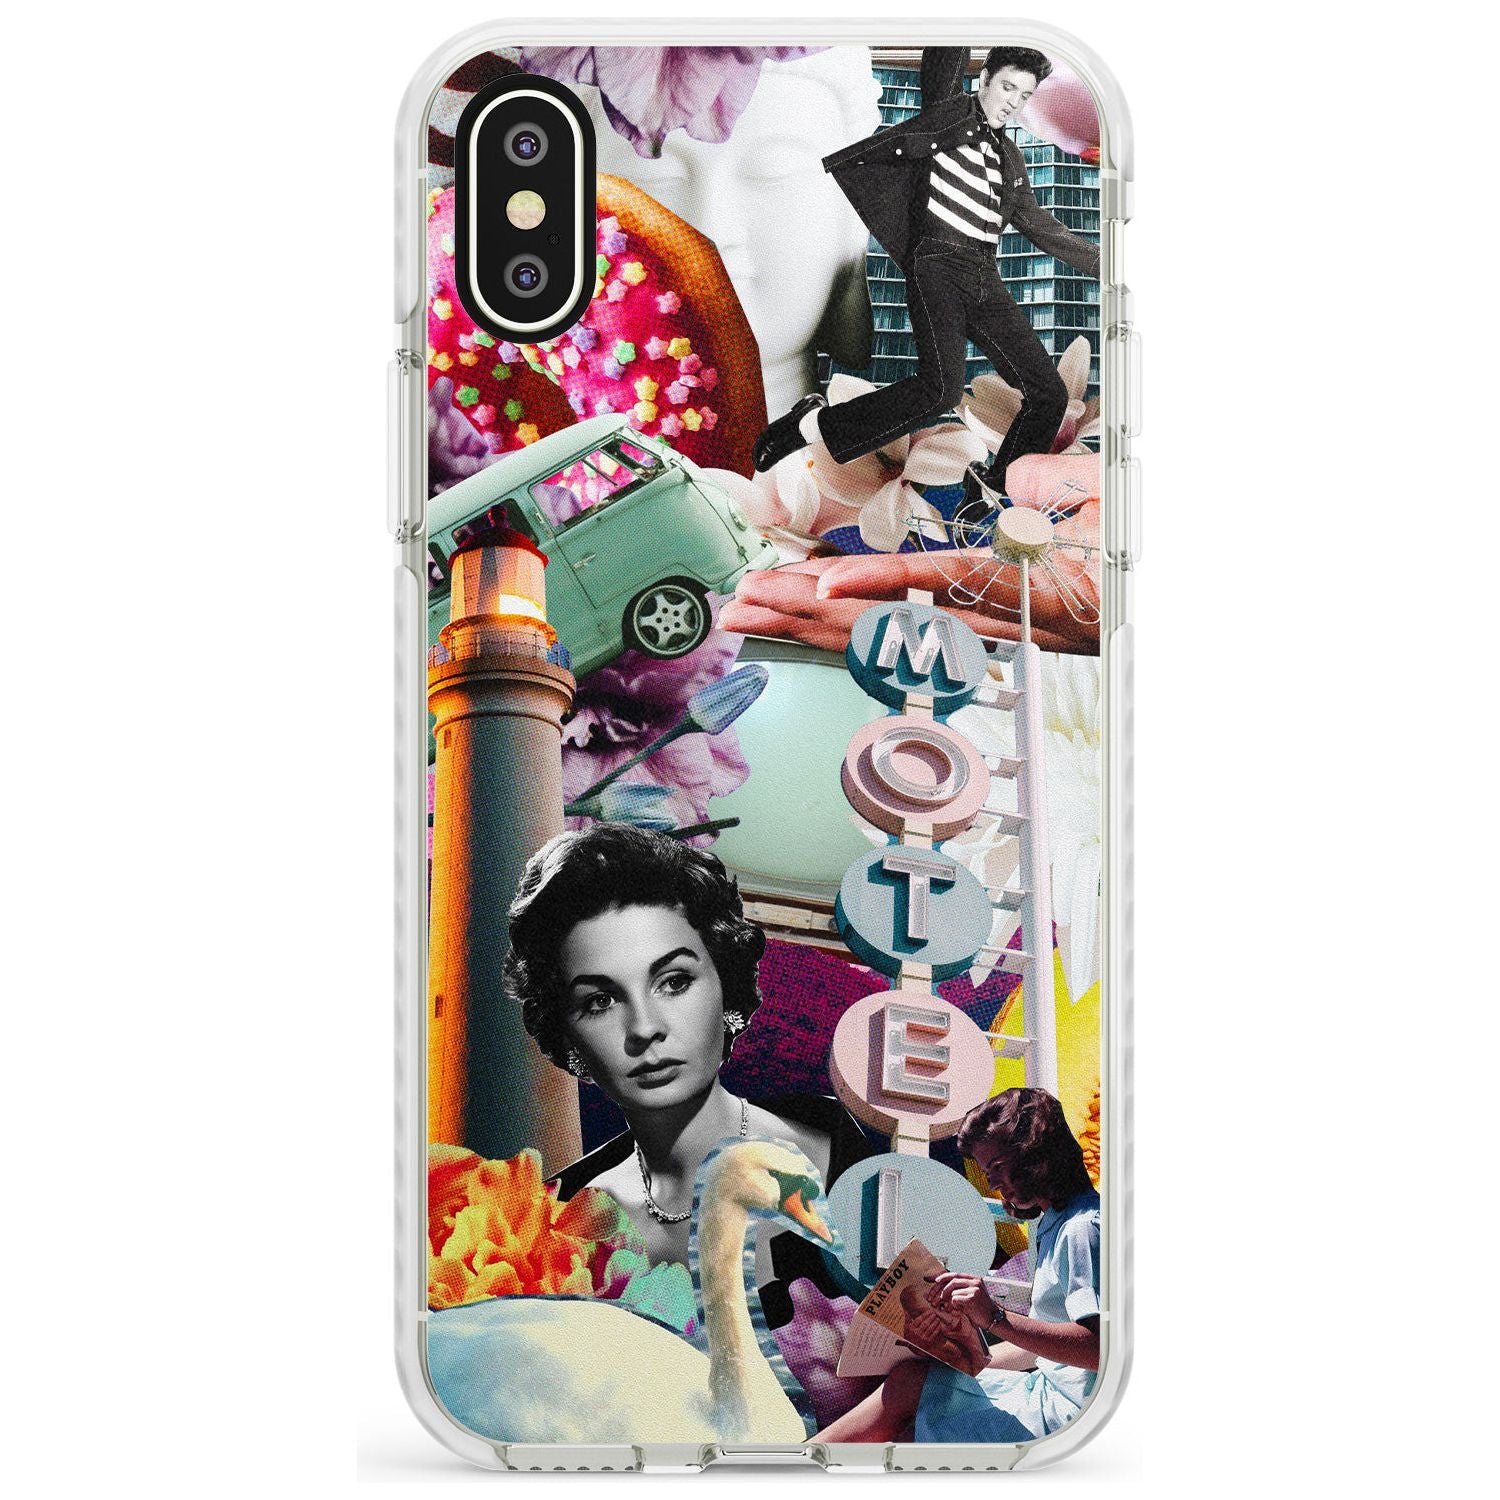 Vintage Collage: Retro Motel Impact Phone Case for iPhone X XS Max XR